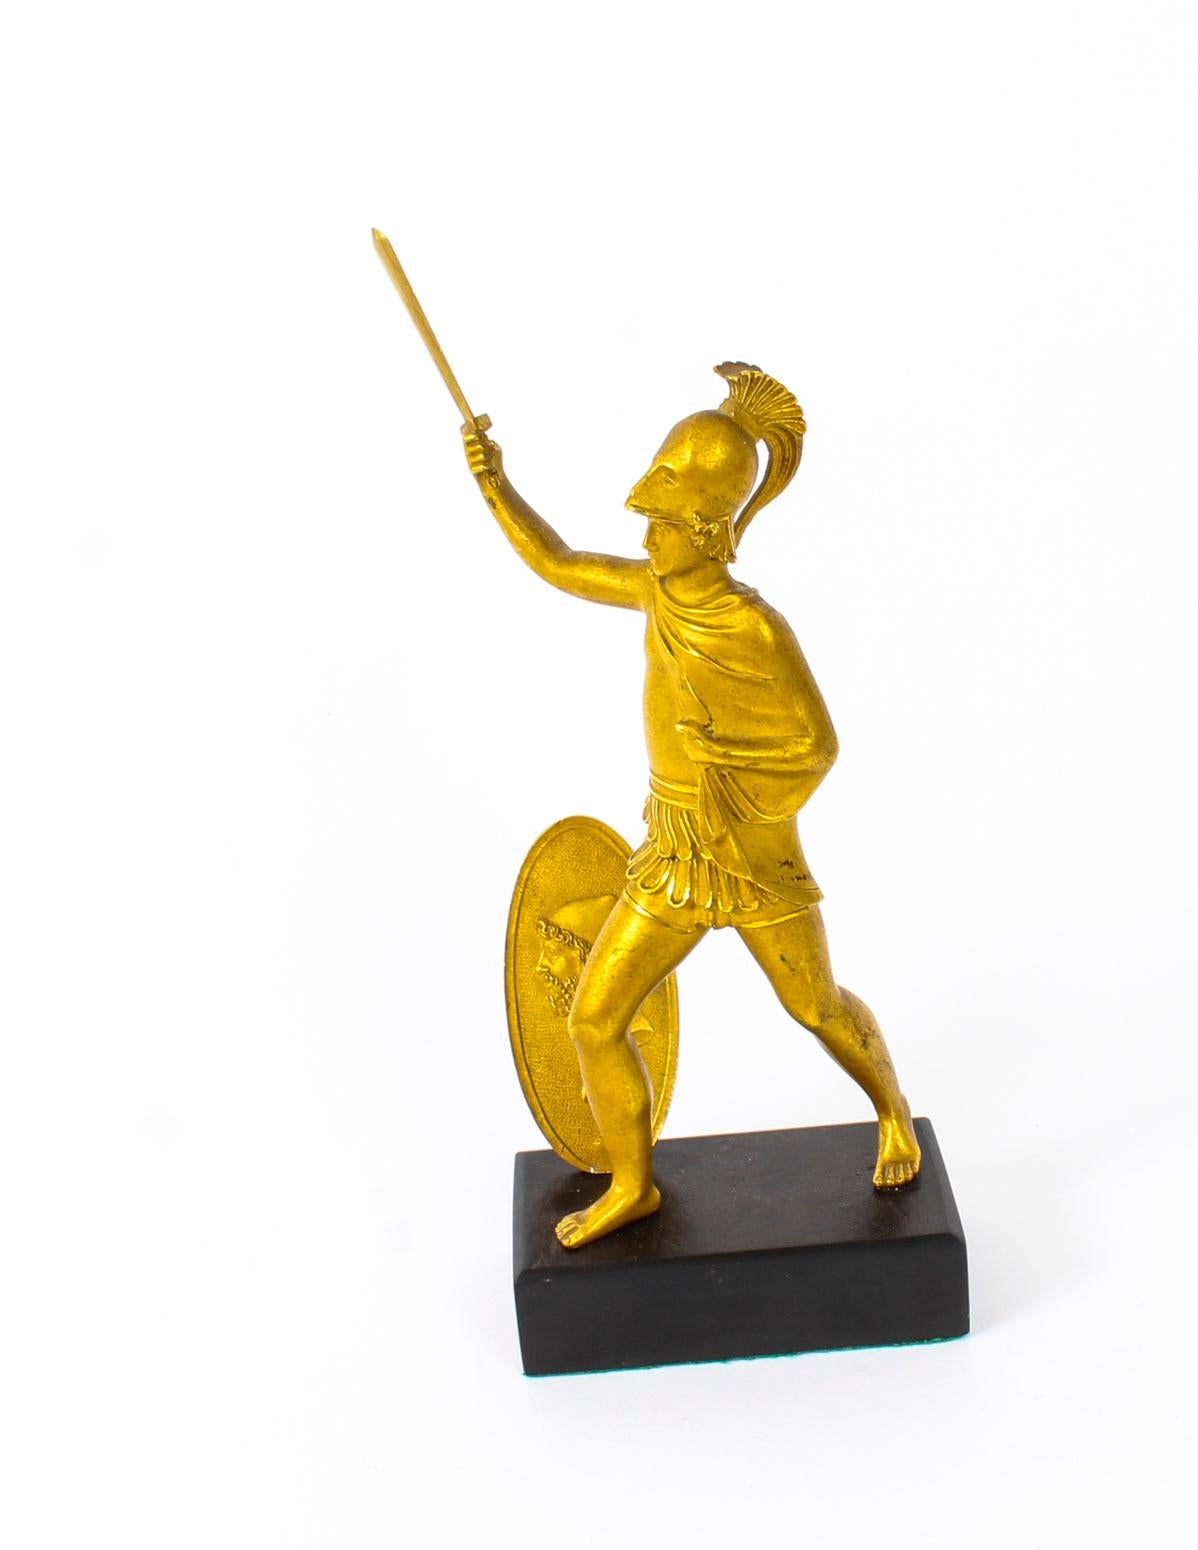 A superbly cast antique Italian Grand Tour ormolu figure of a Roman soldier, circa 1850 in date.
 
The soldier is armed with a raised sword, dressed in traditional costume with a fine portrait shield at his side and stands on a rectangular belge